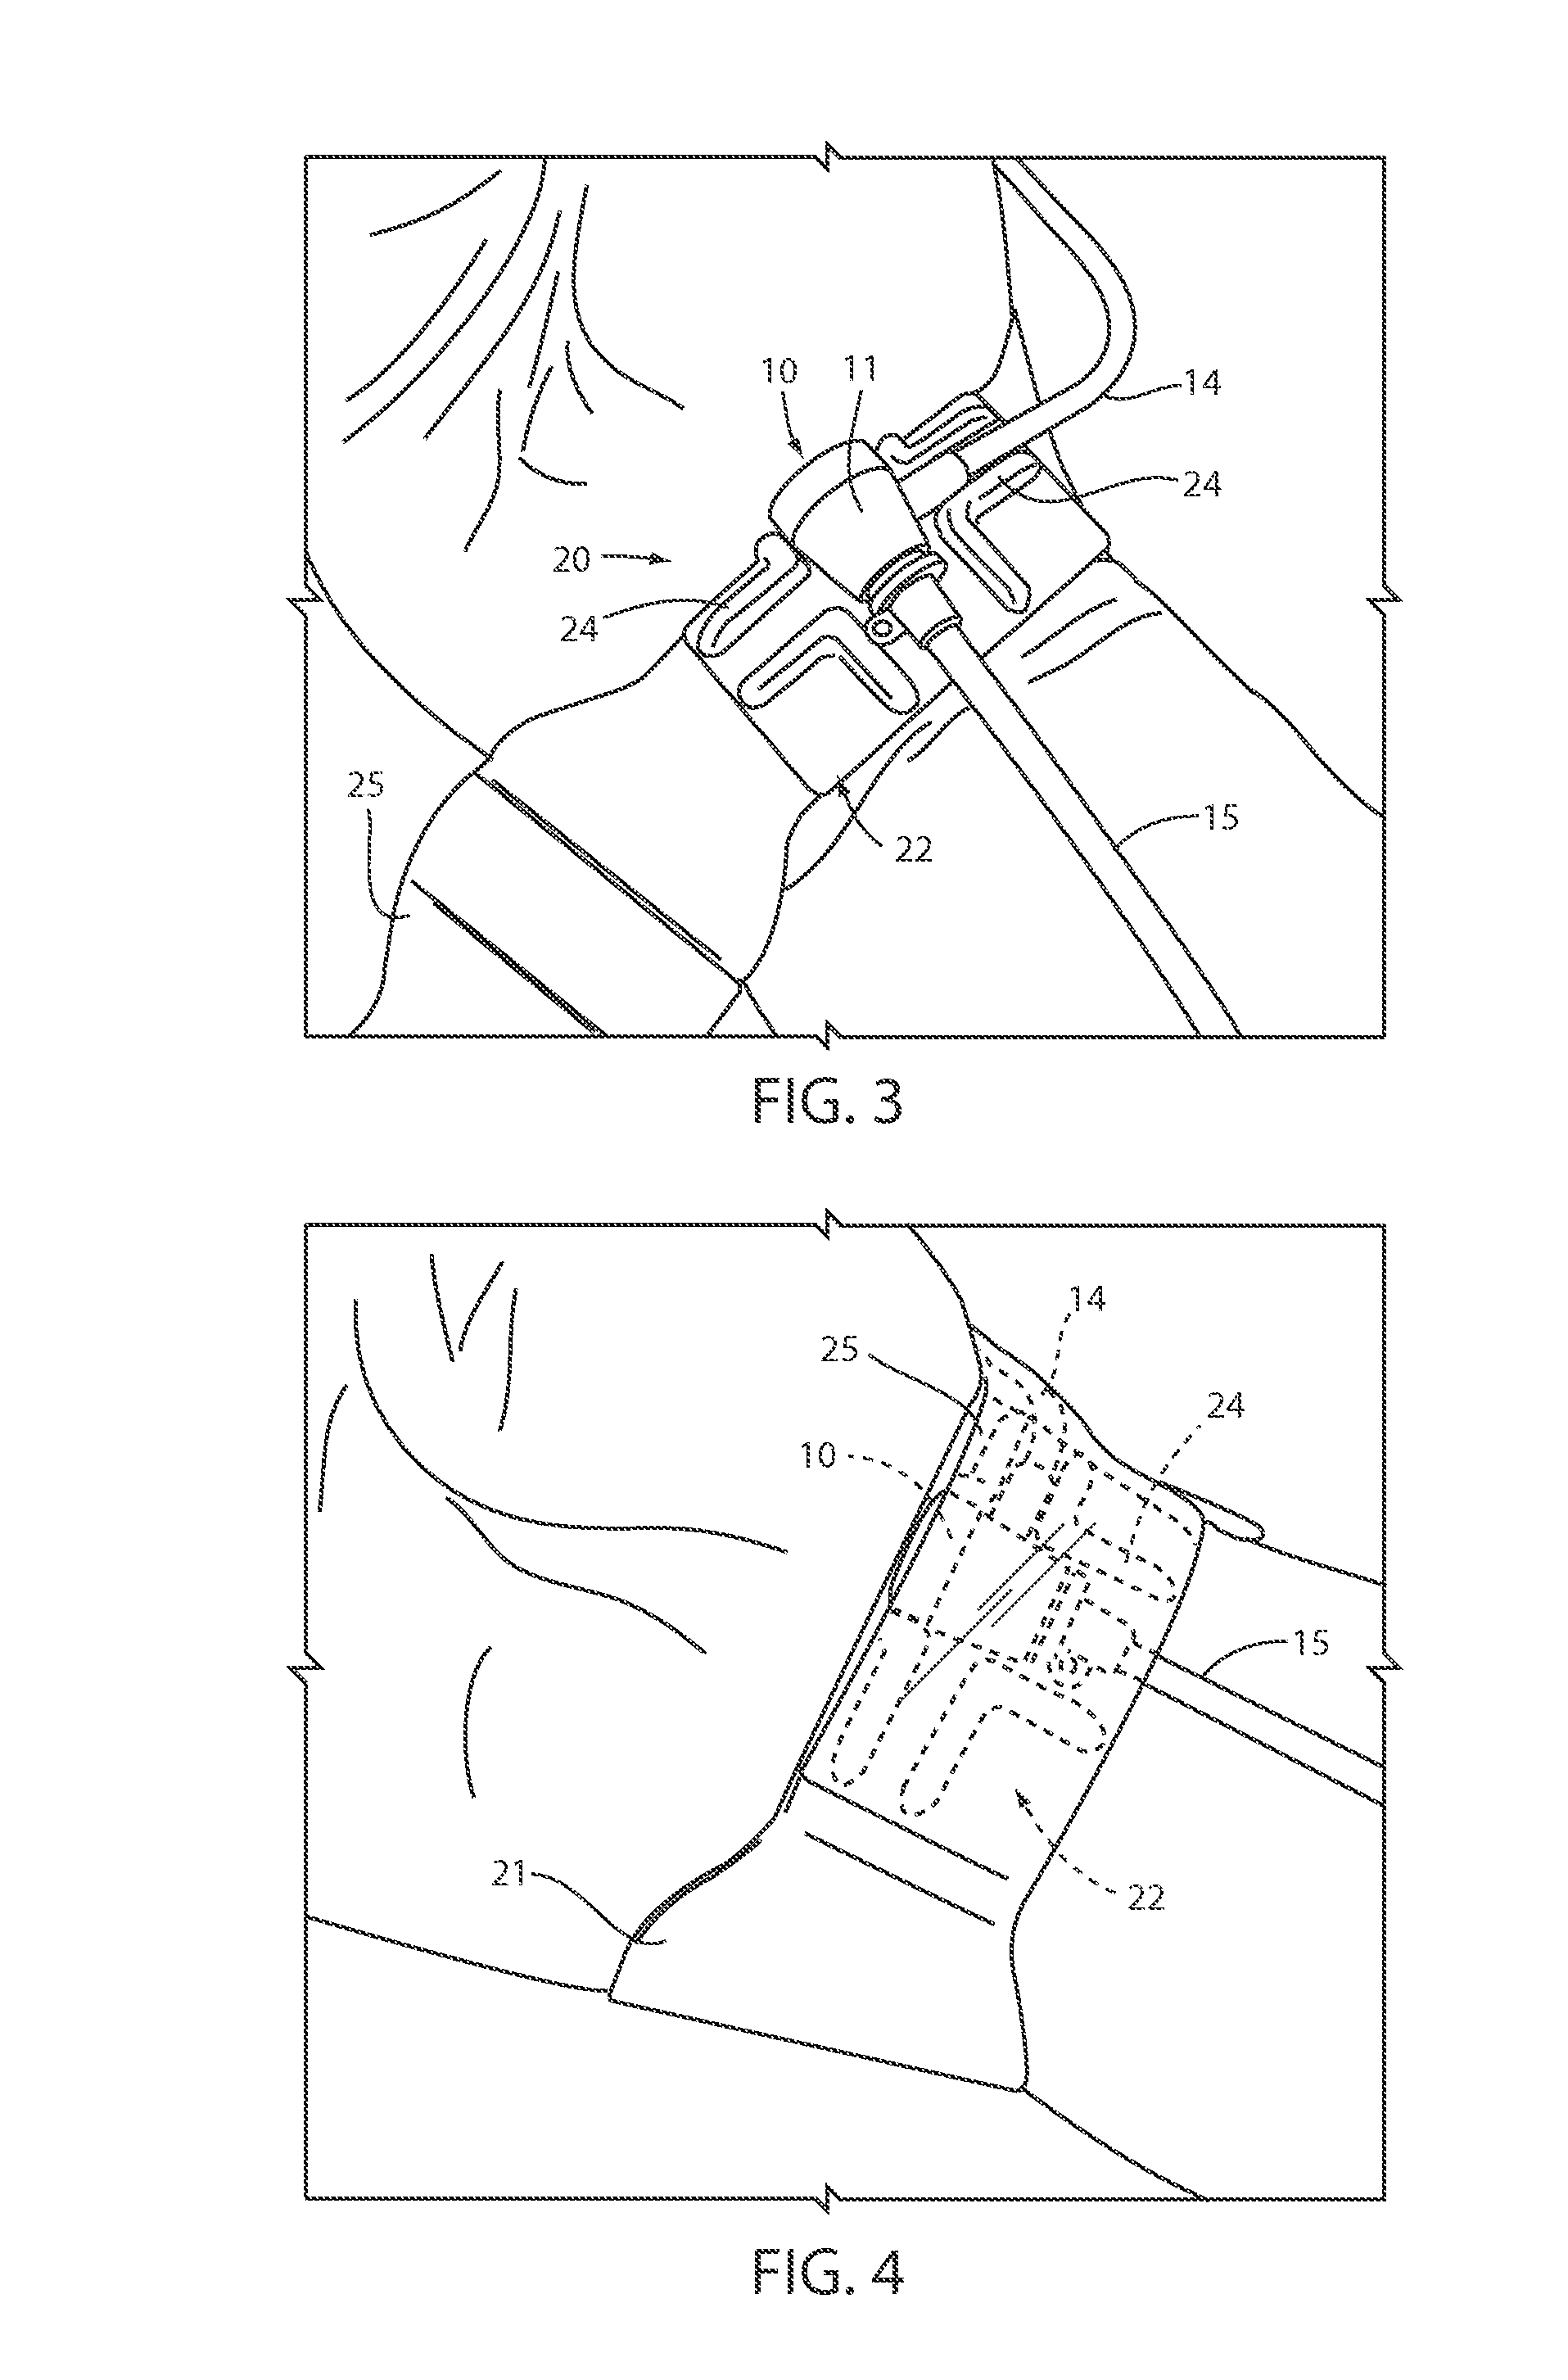 Method and device for interventional site management of sheaths and catheters